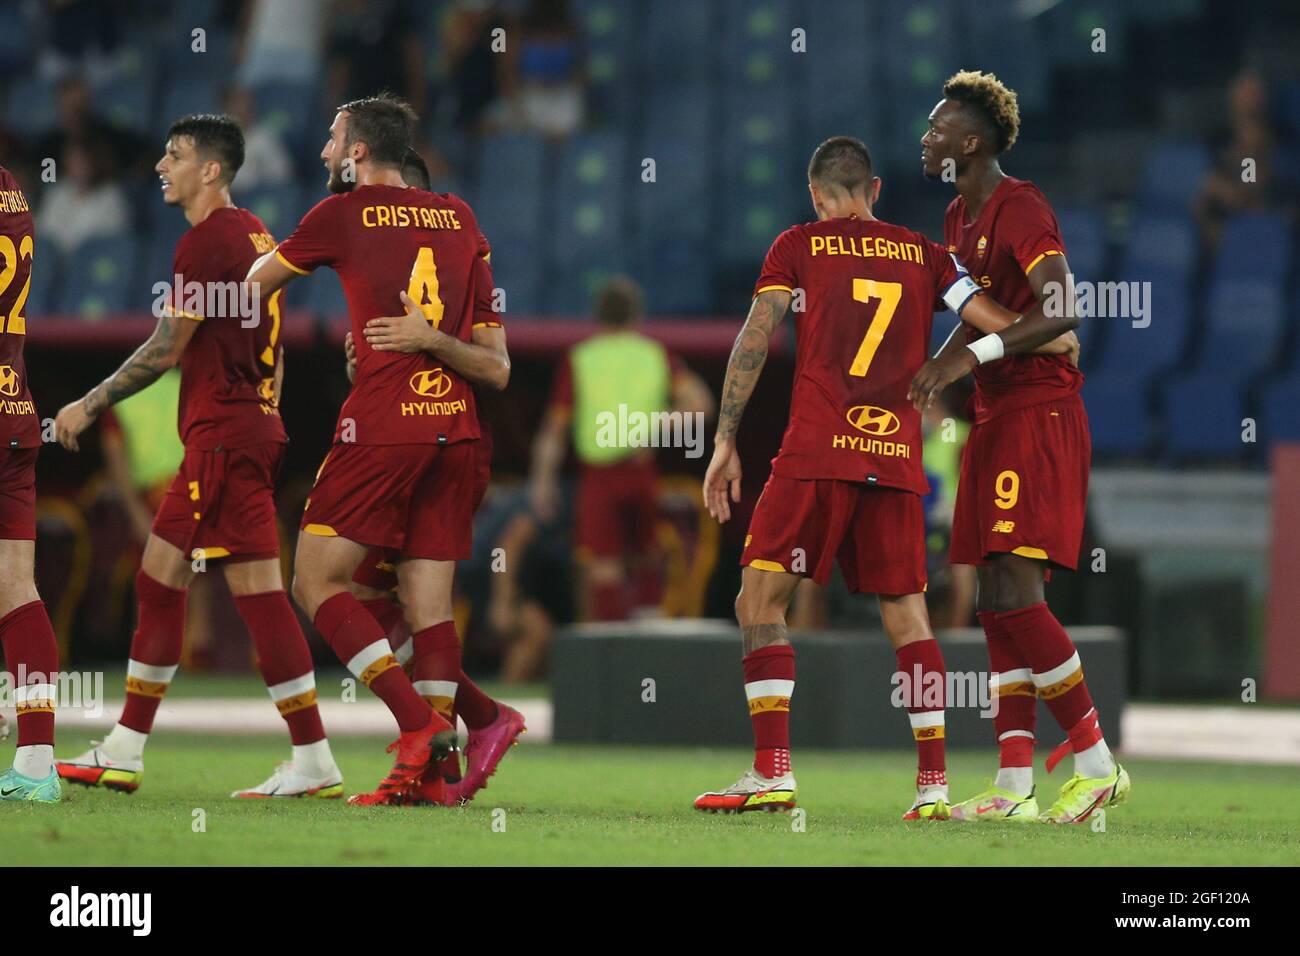 Rome, Italy. 22nd Aug, 2021. ROME, Italy - 22.08.2021: AS ROMA CELEBRATES GOAL during the Italian Serie A football match between AS ROMA VS FIORENTINA at Olympic stadium in Rome on August 22th, 2021. Credit: Independent Photo Agency/Alamy Live News Stock Photo